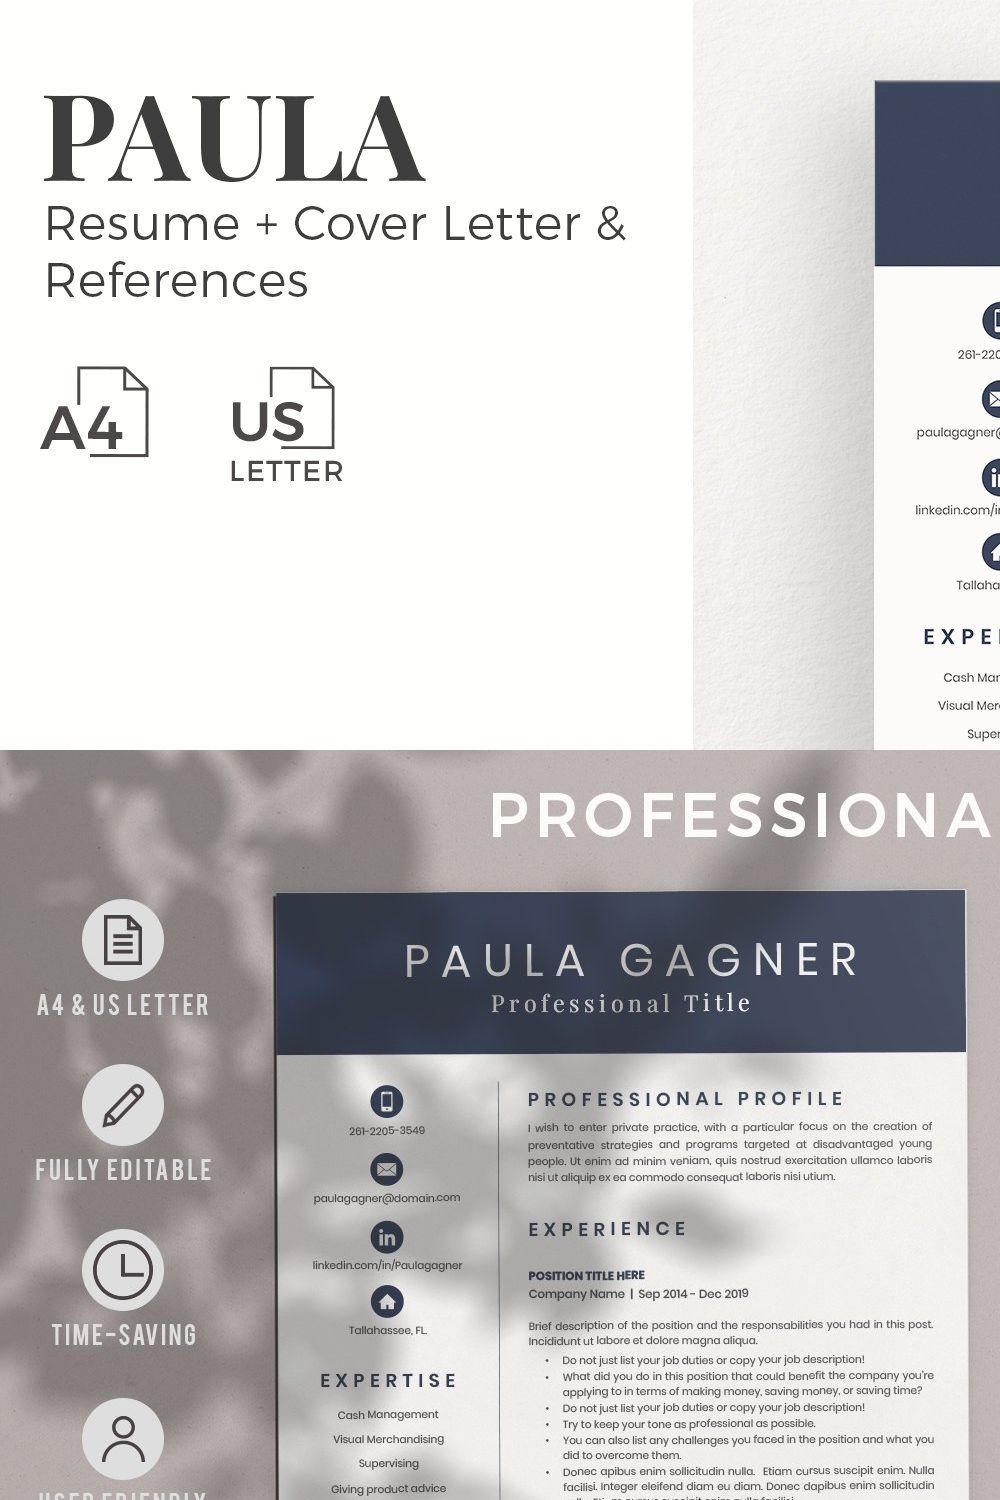 Accountant Resume CV with Experience pinterest preview image.